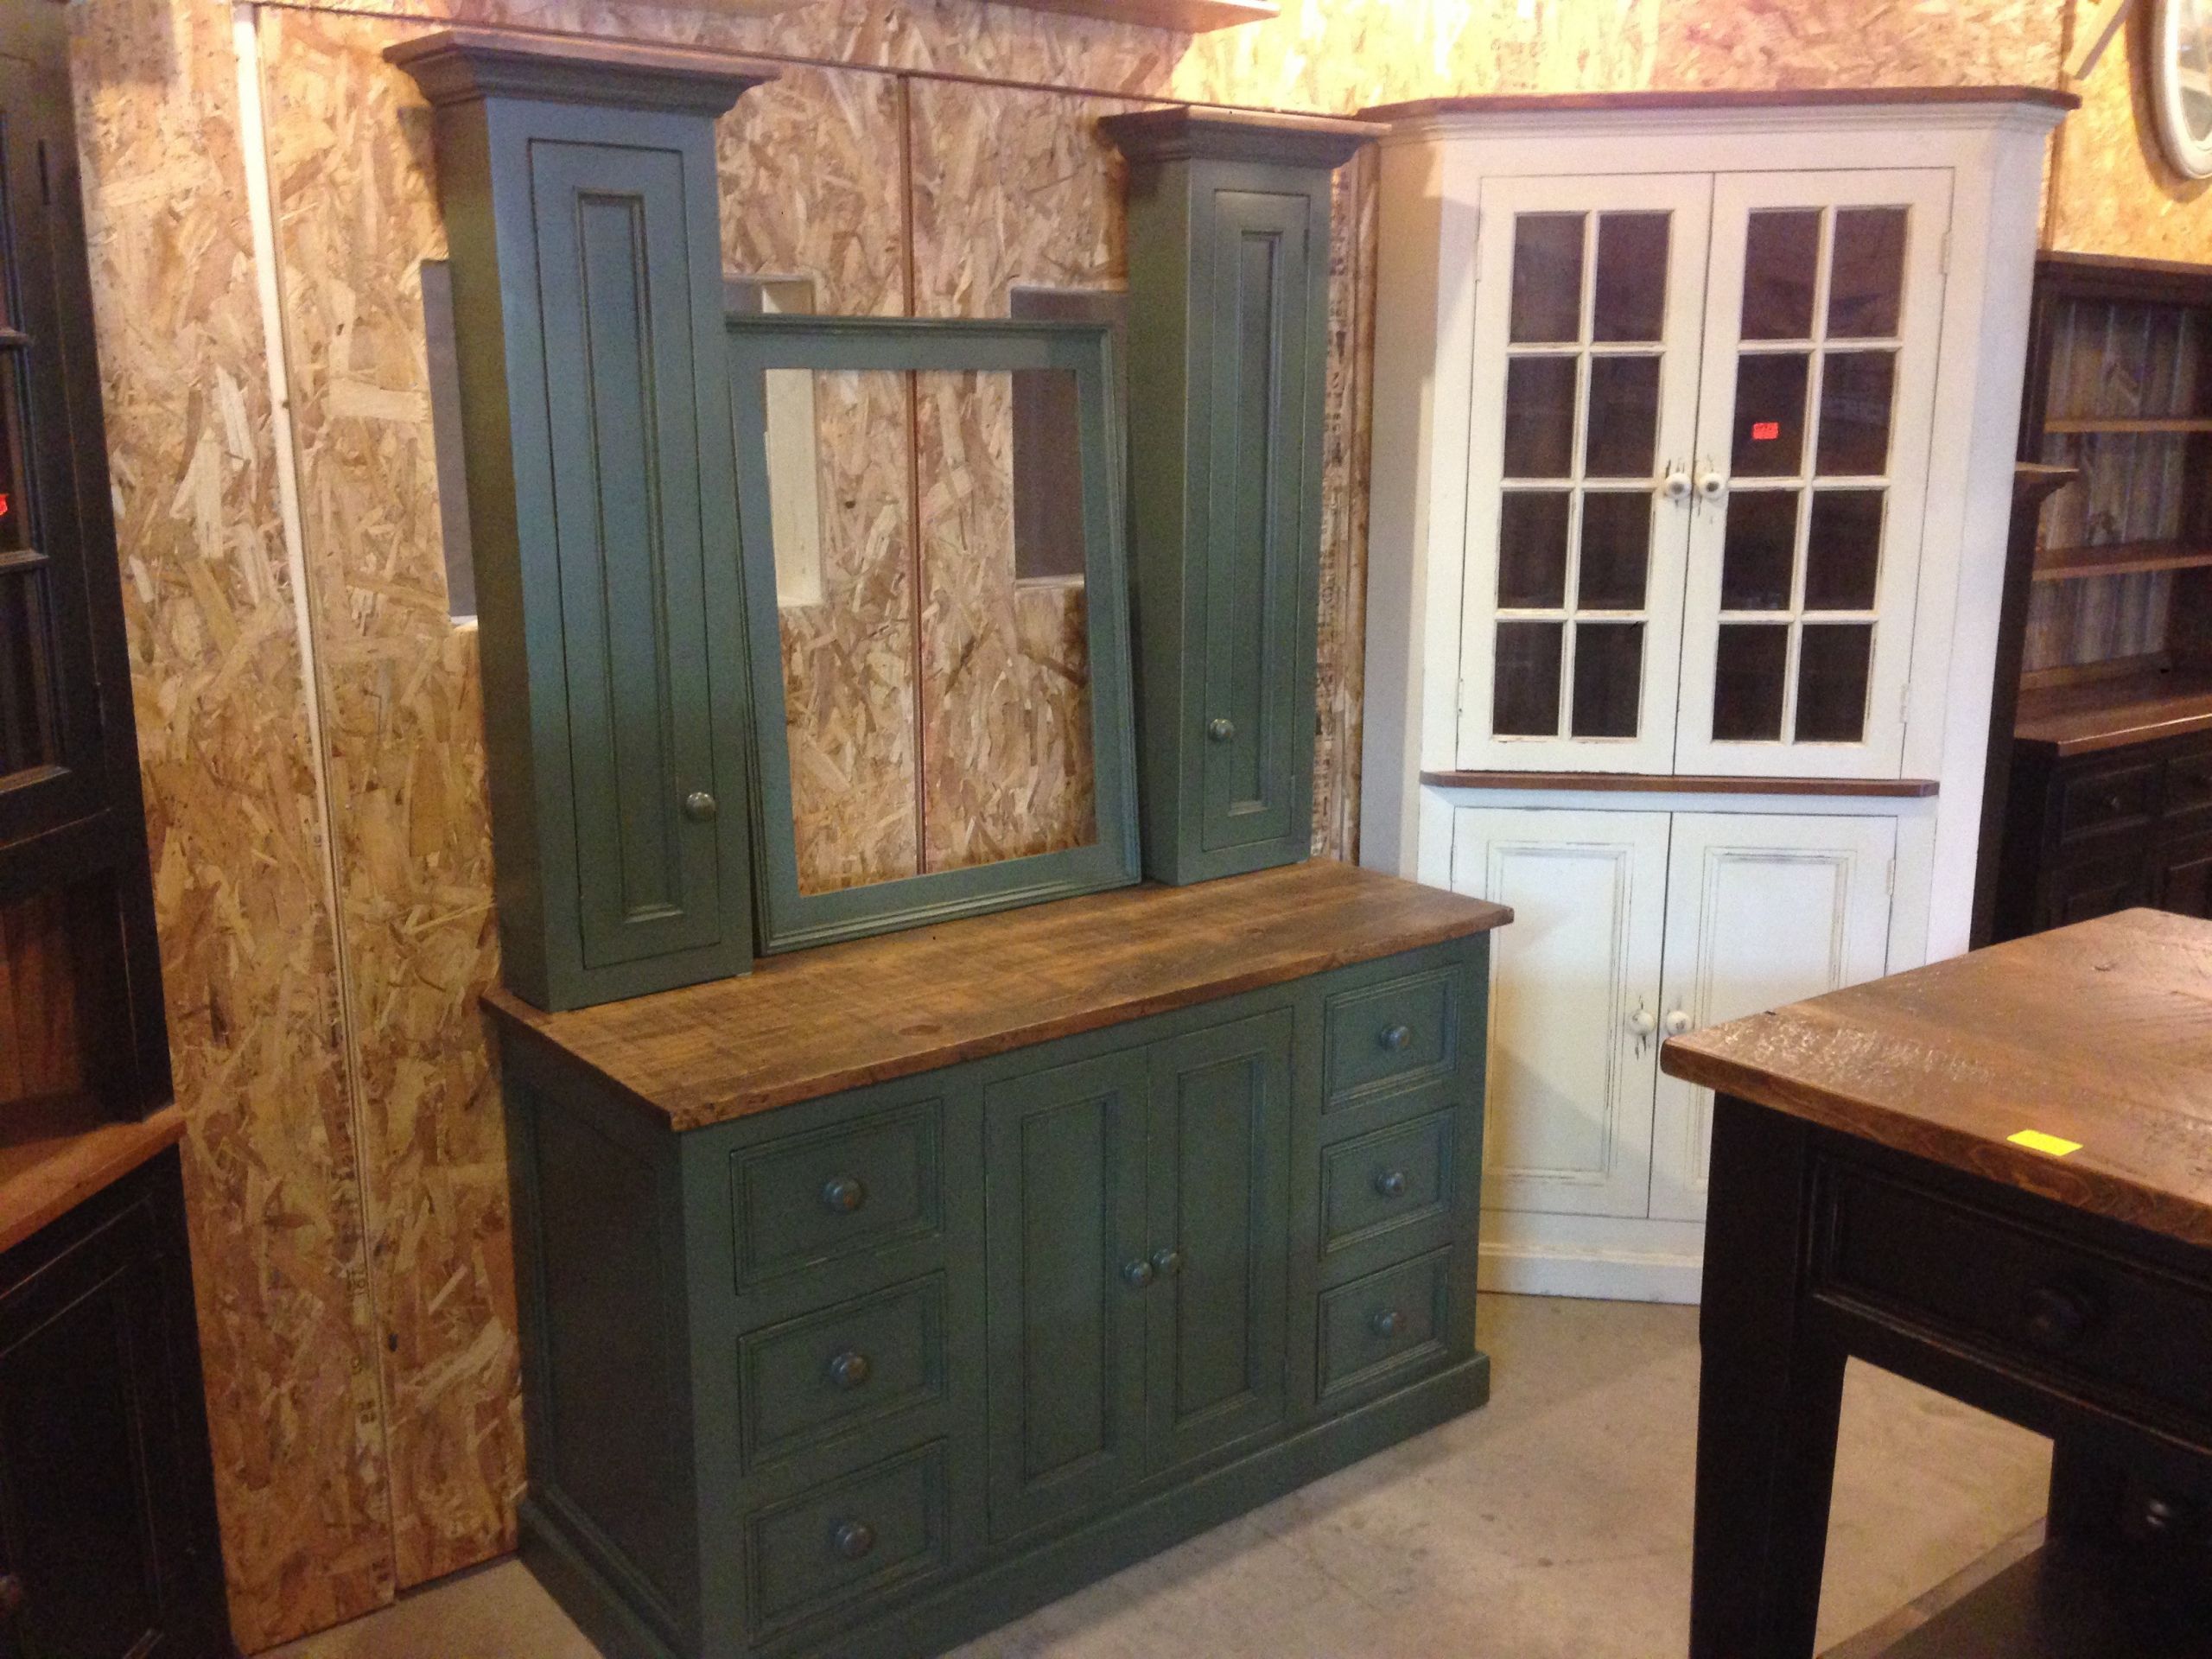 5 Foot Bathroom Vanity
 5 Foot Bathroom Vanity in Country Green with House Blend